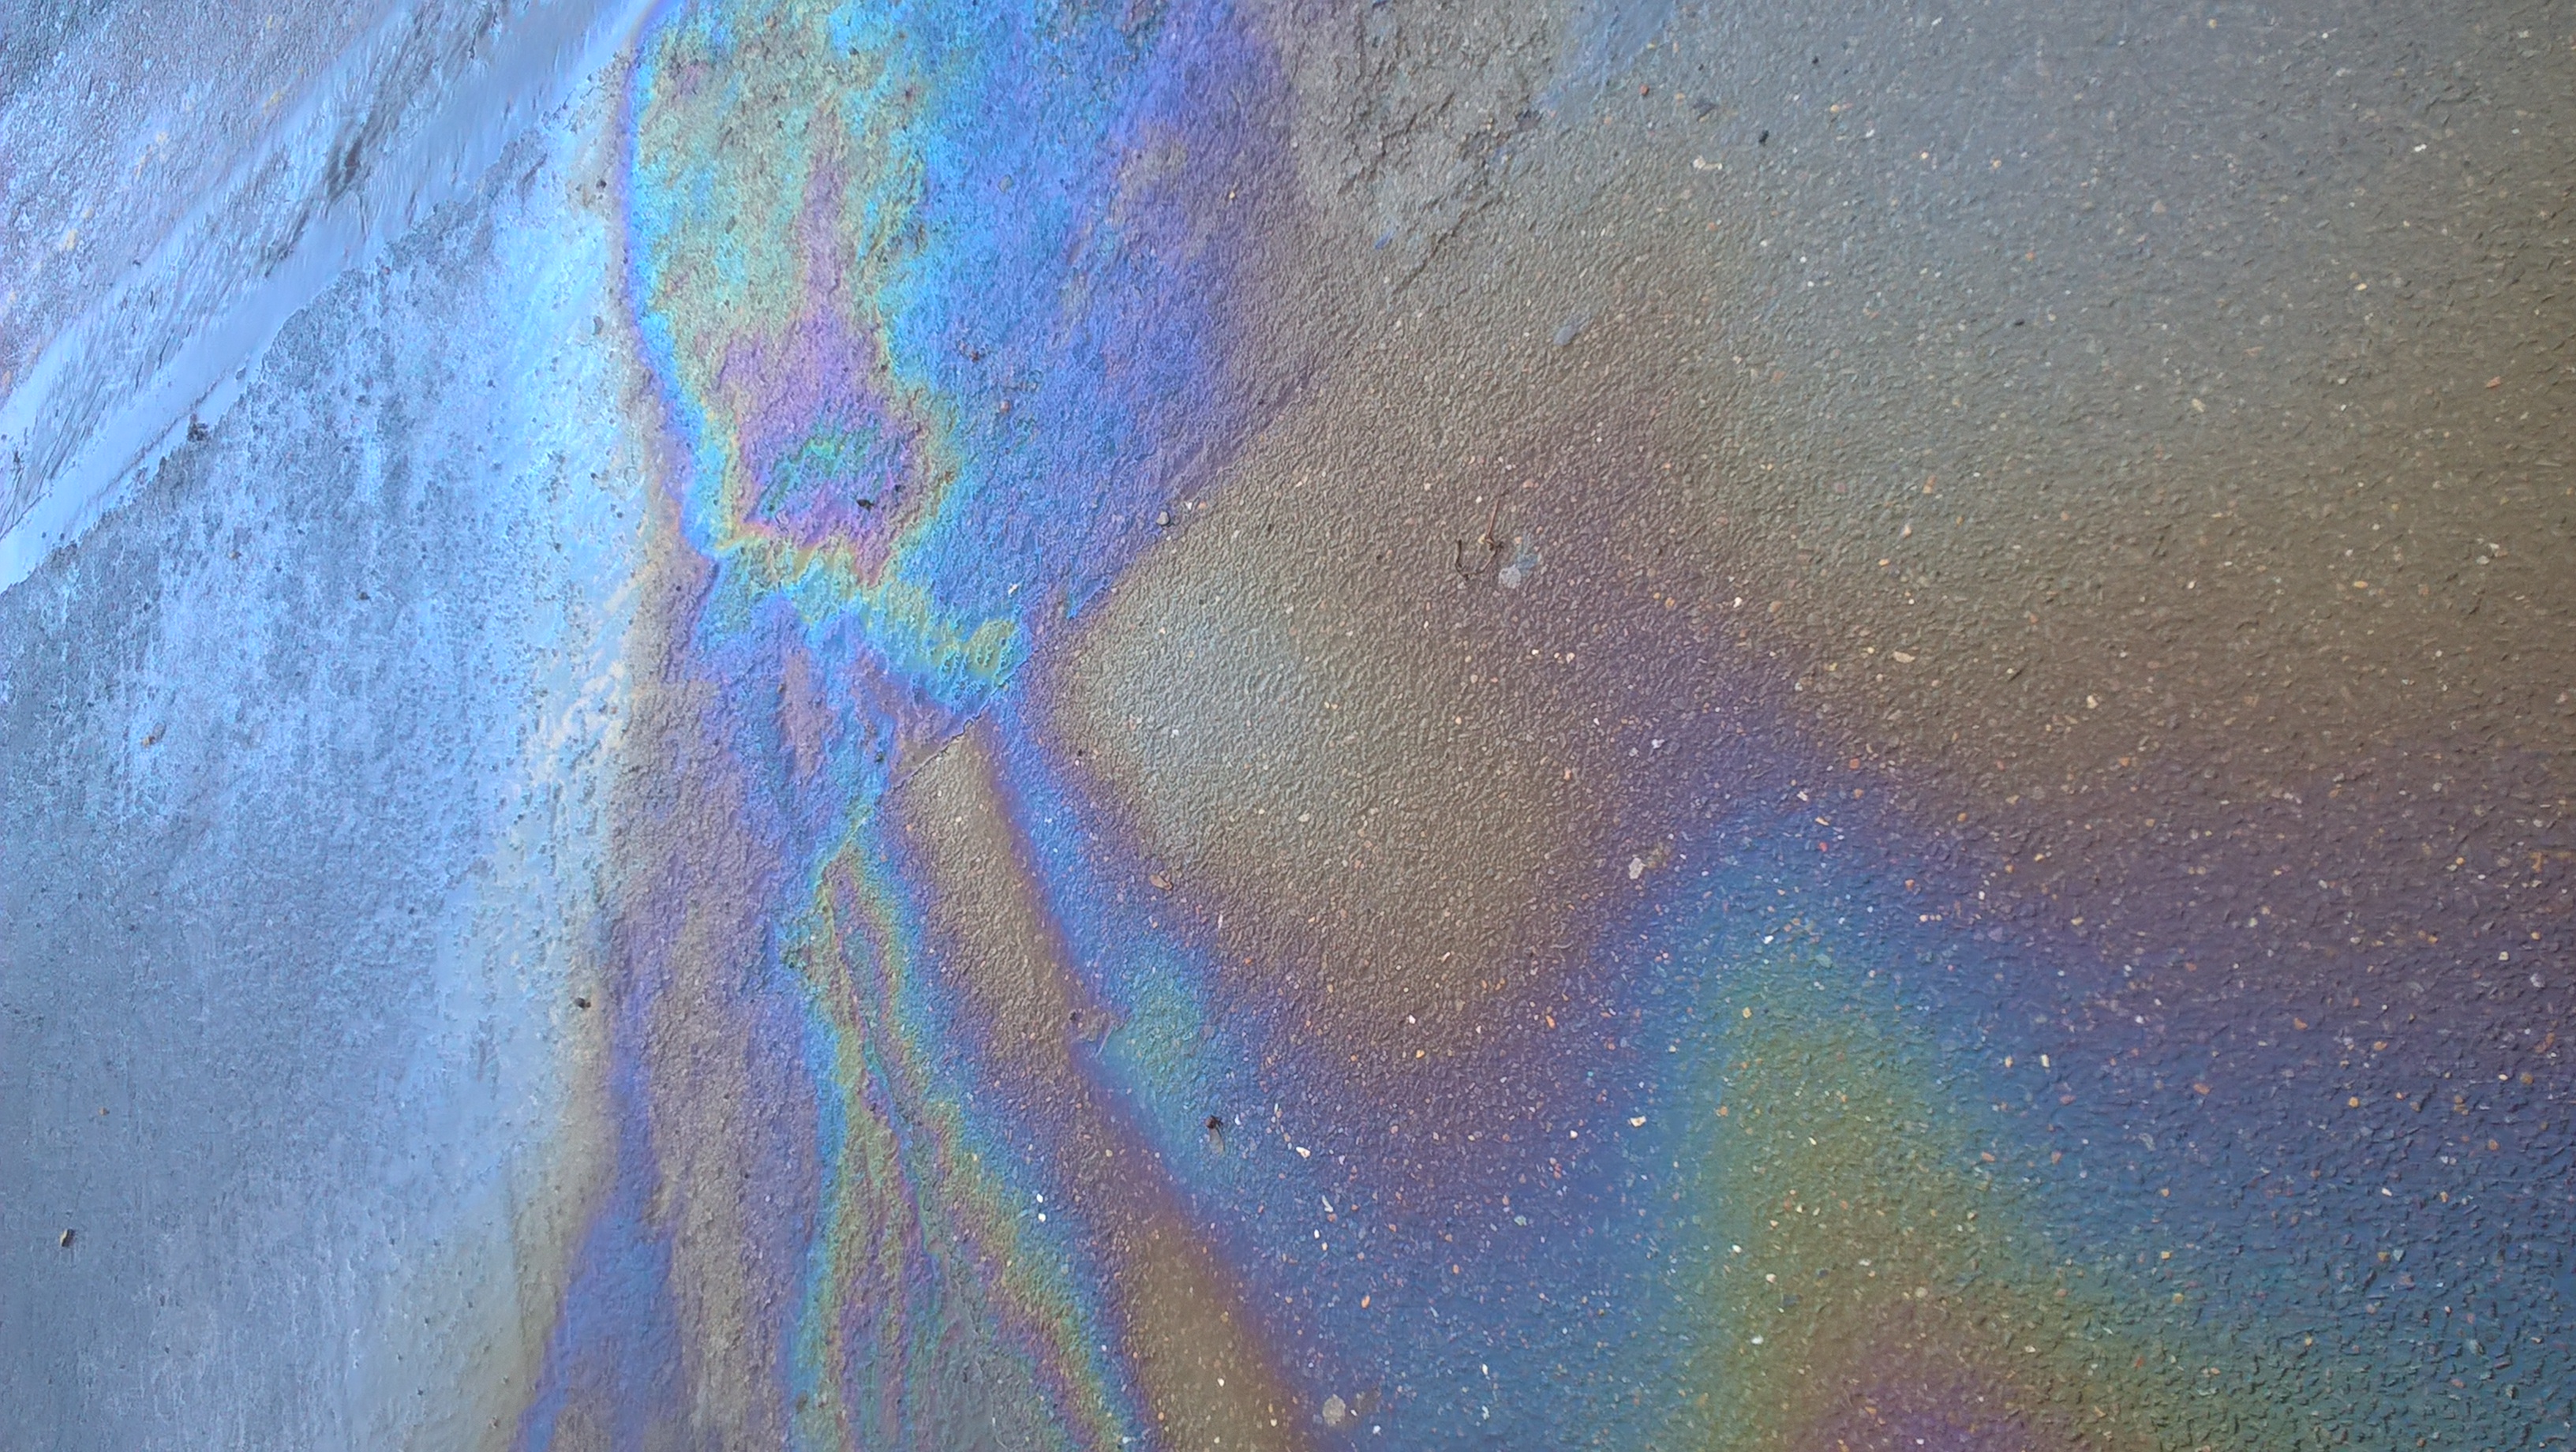 Oil film interference